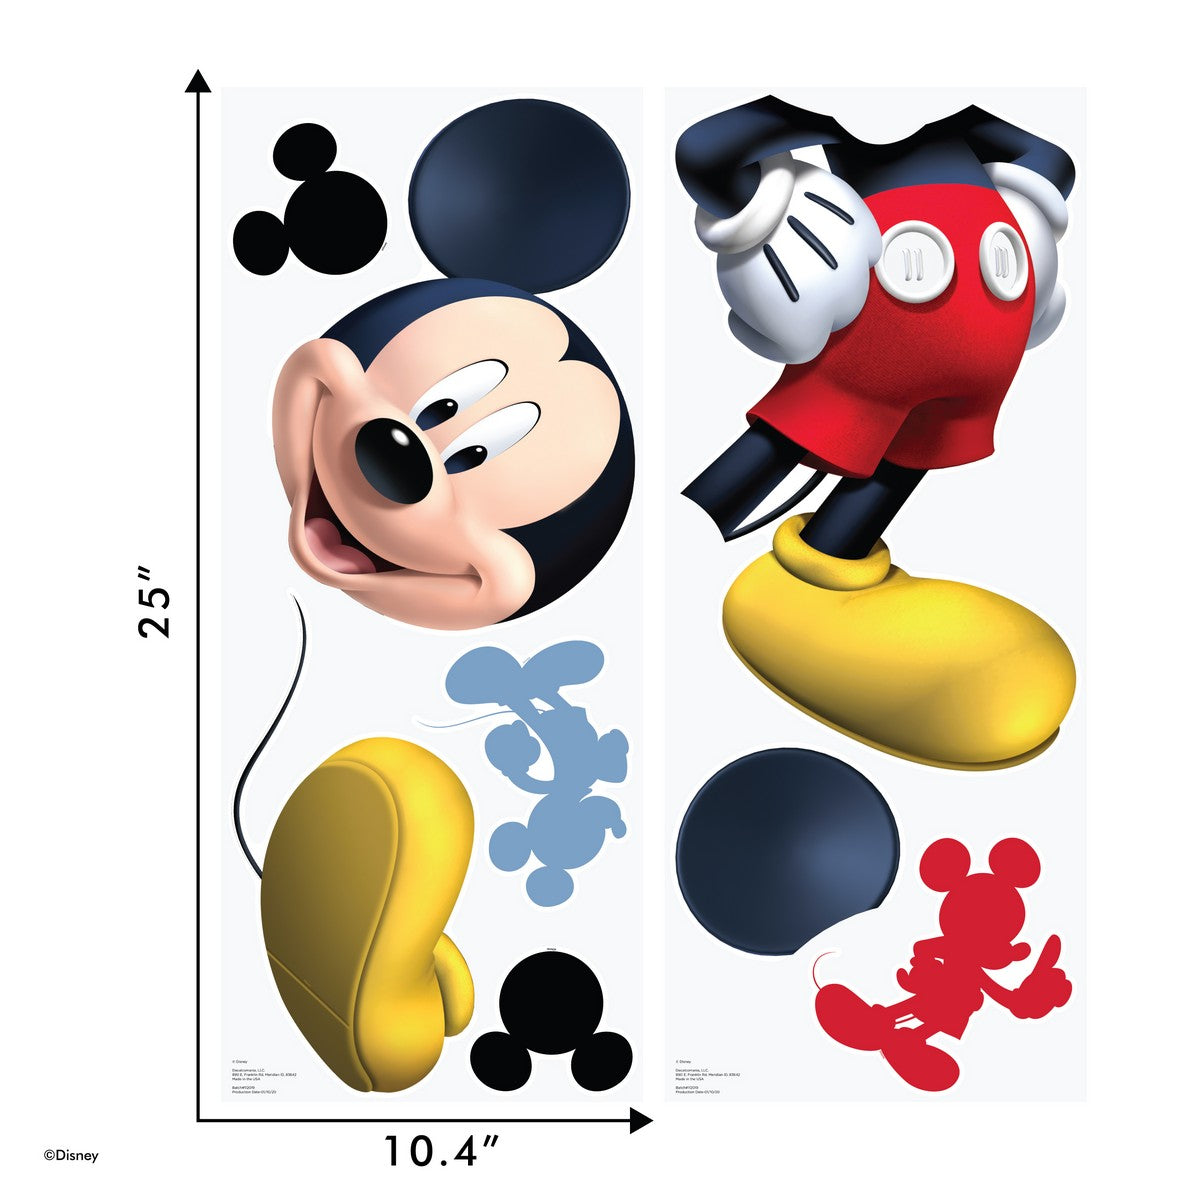 Vinyl and stickers disney mickey mouse and his friends